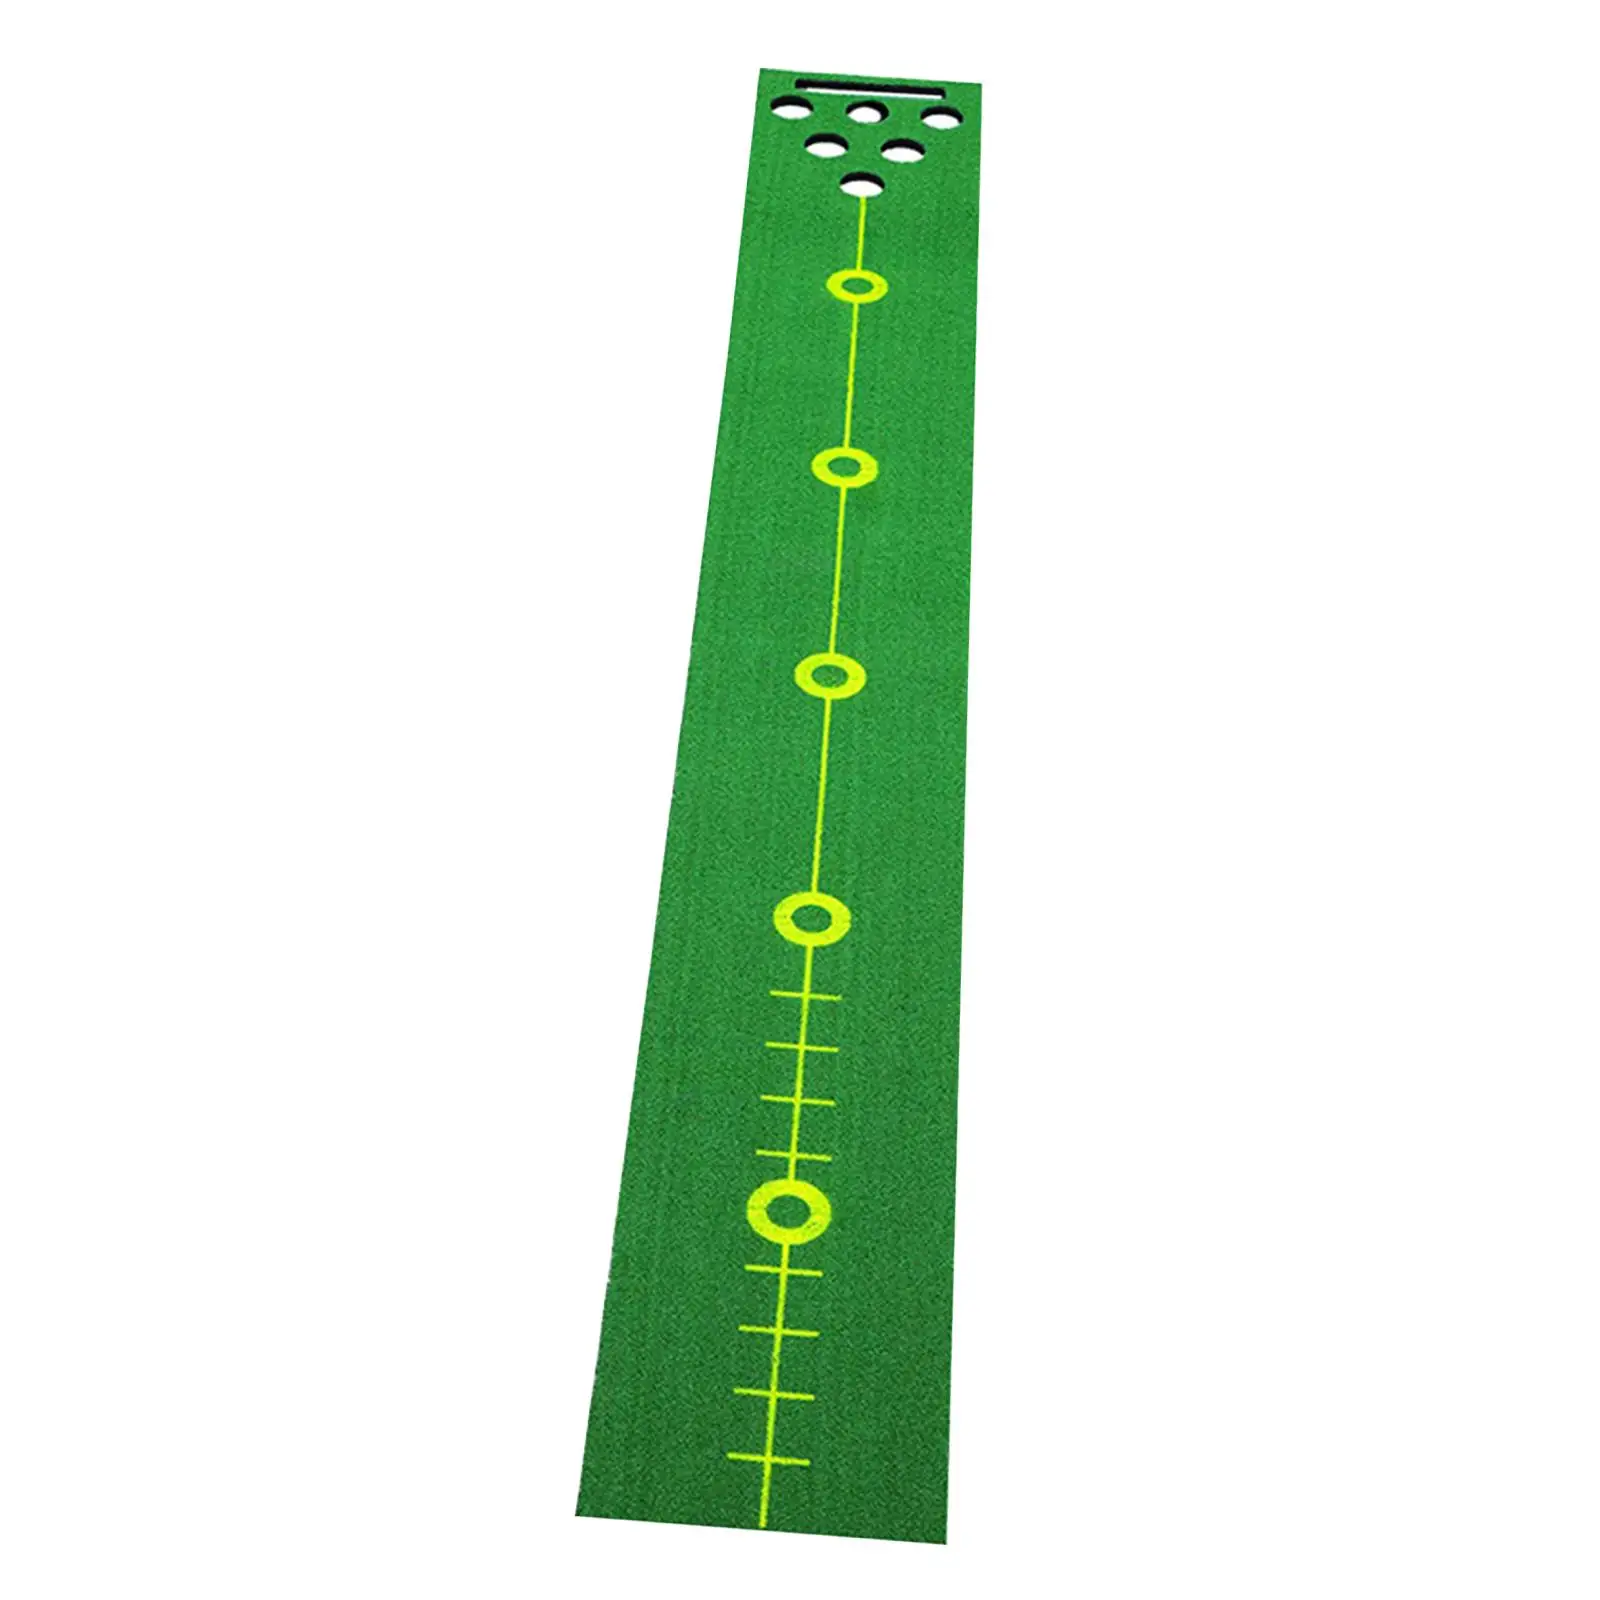 Golf Training Green Mat Swing Detection Hitting Rug Training Aid Trainer Golf Putting Practice Mat for Backyard Home